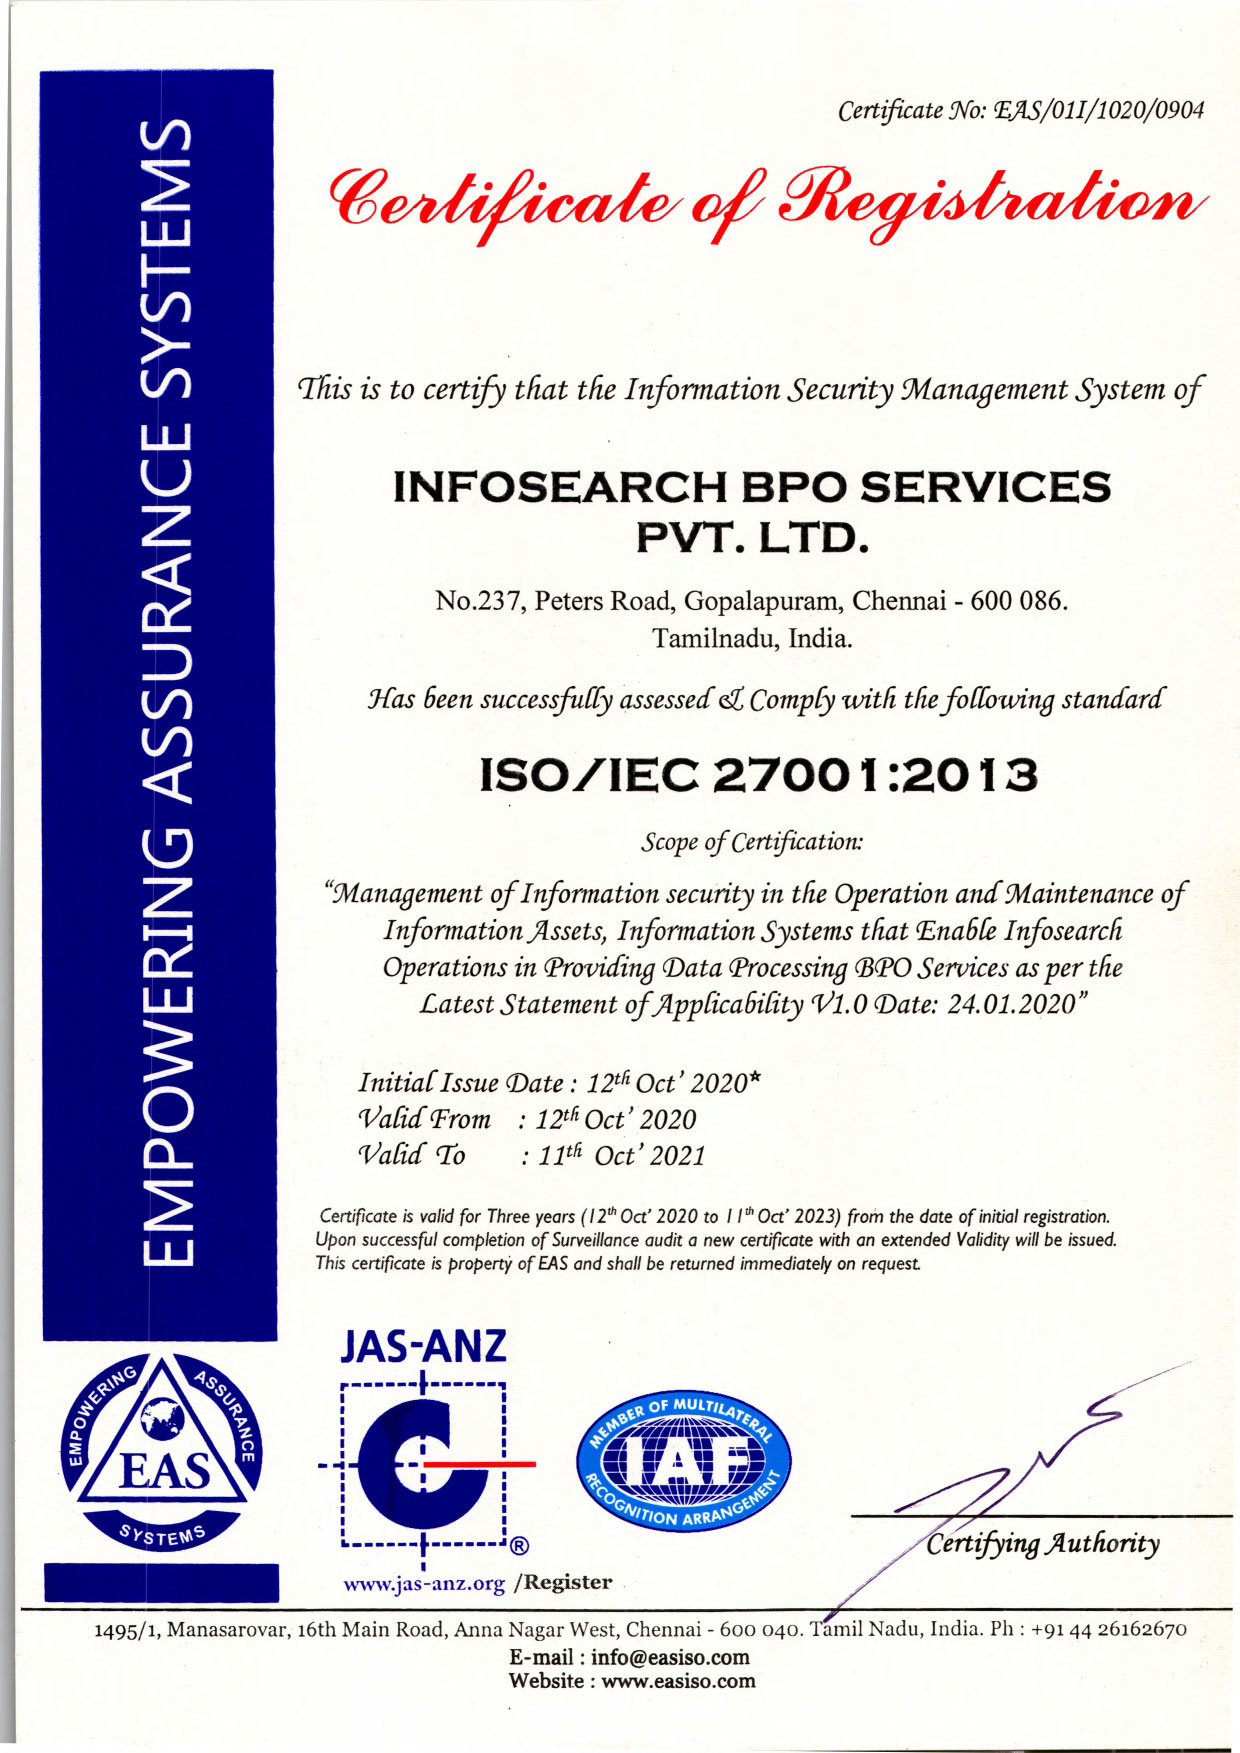 ISO 27001:2013 Certification for ISMS | Infosearch BPO News